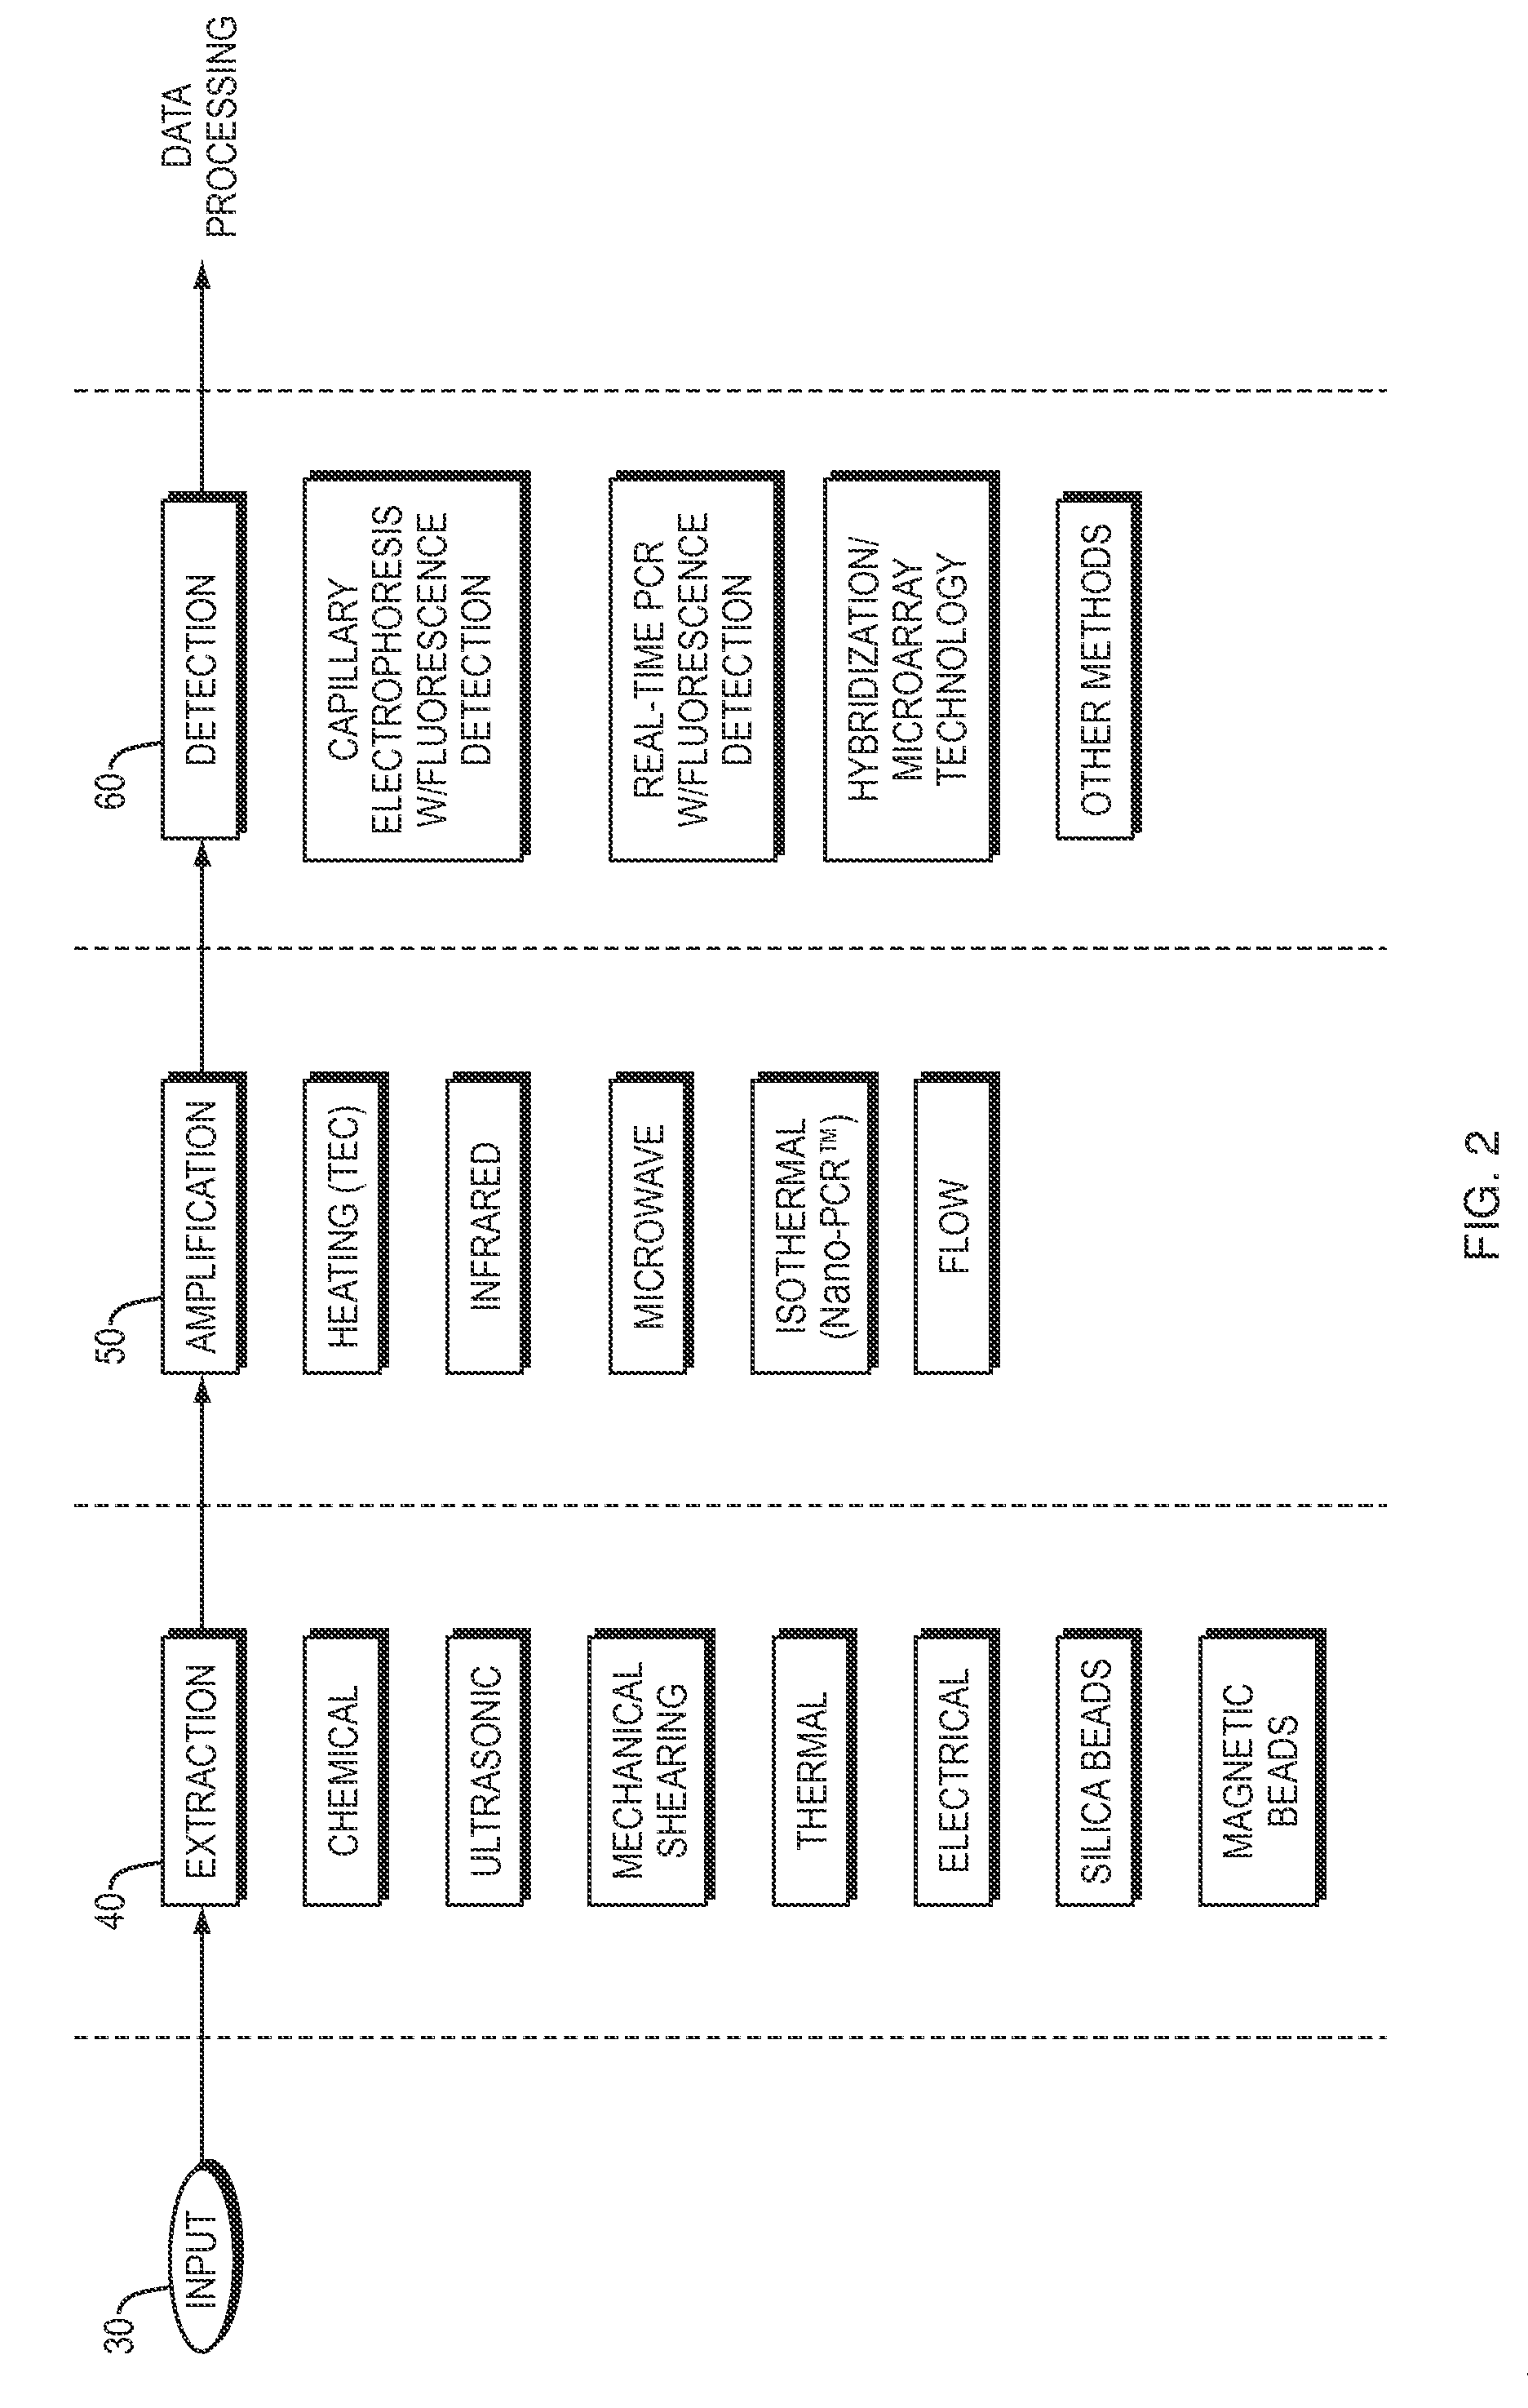 Systems and methods for mobile device analysis of nucleic acids and proteins